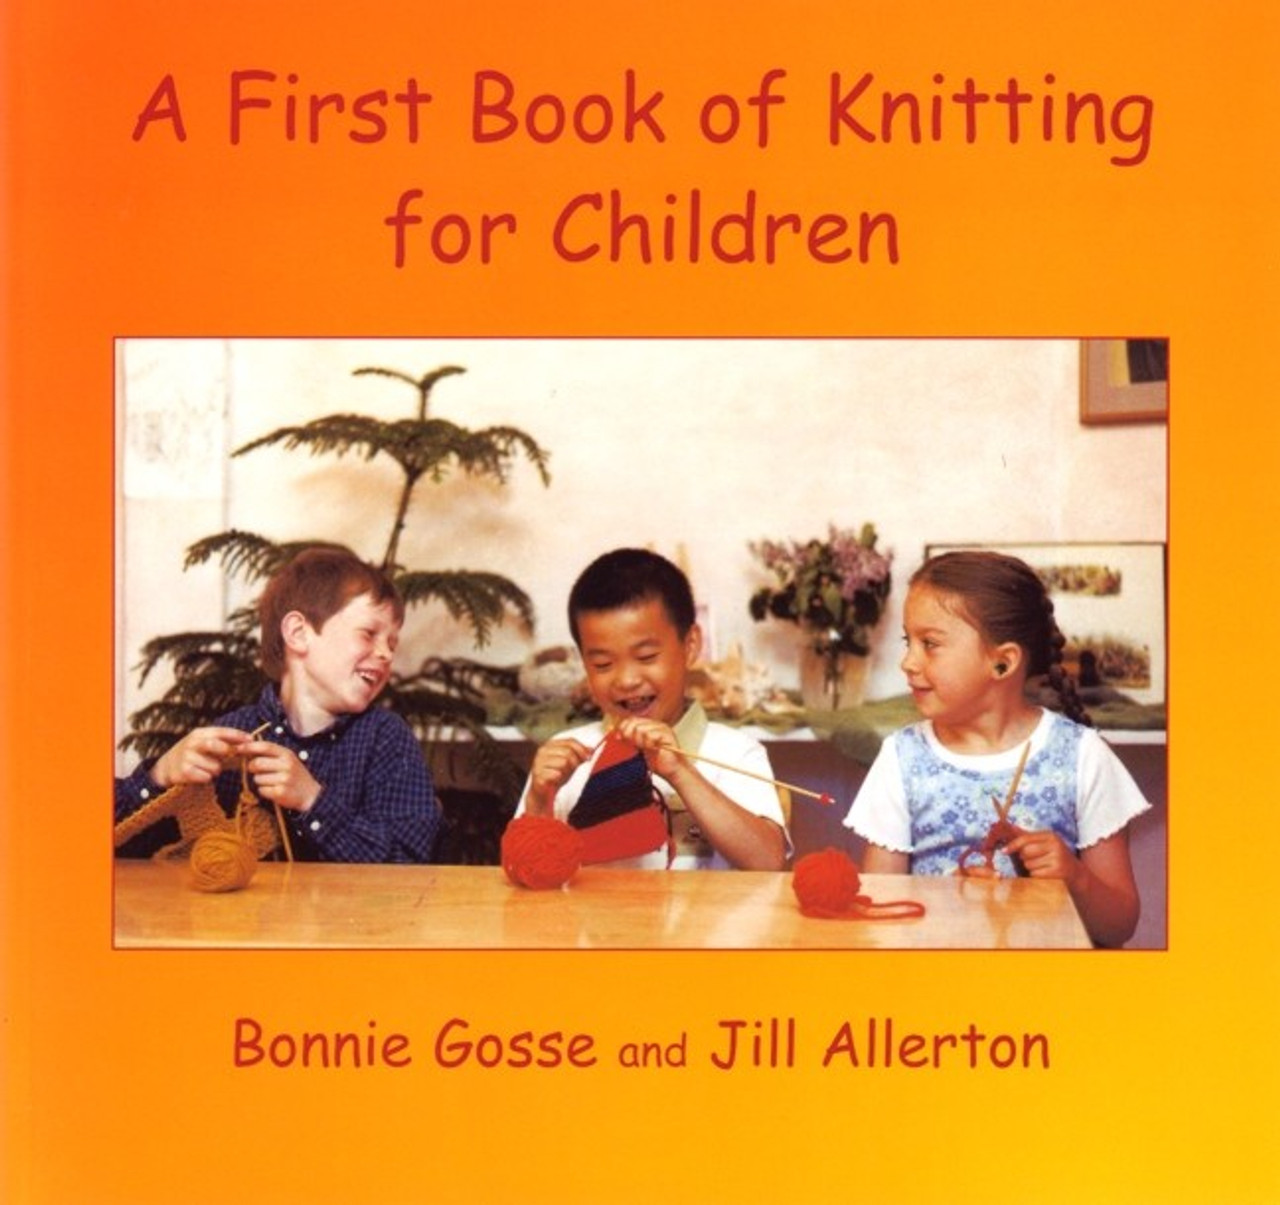 Book Review: Children's Picture Books About Knitting, Sewing and